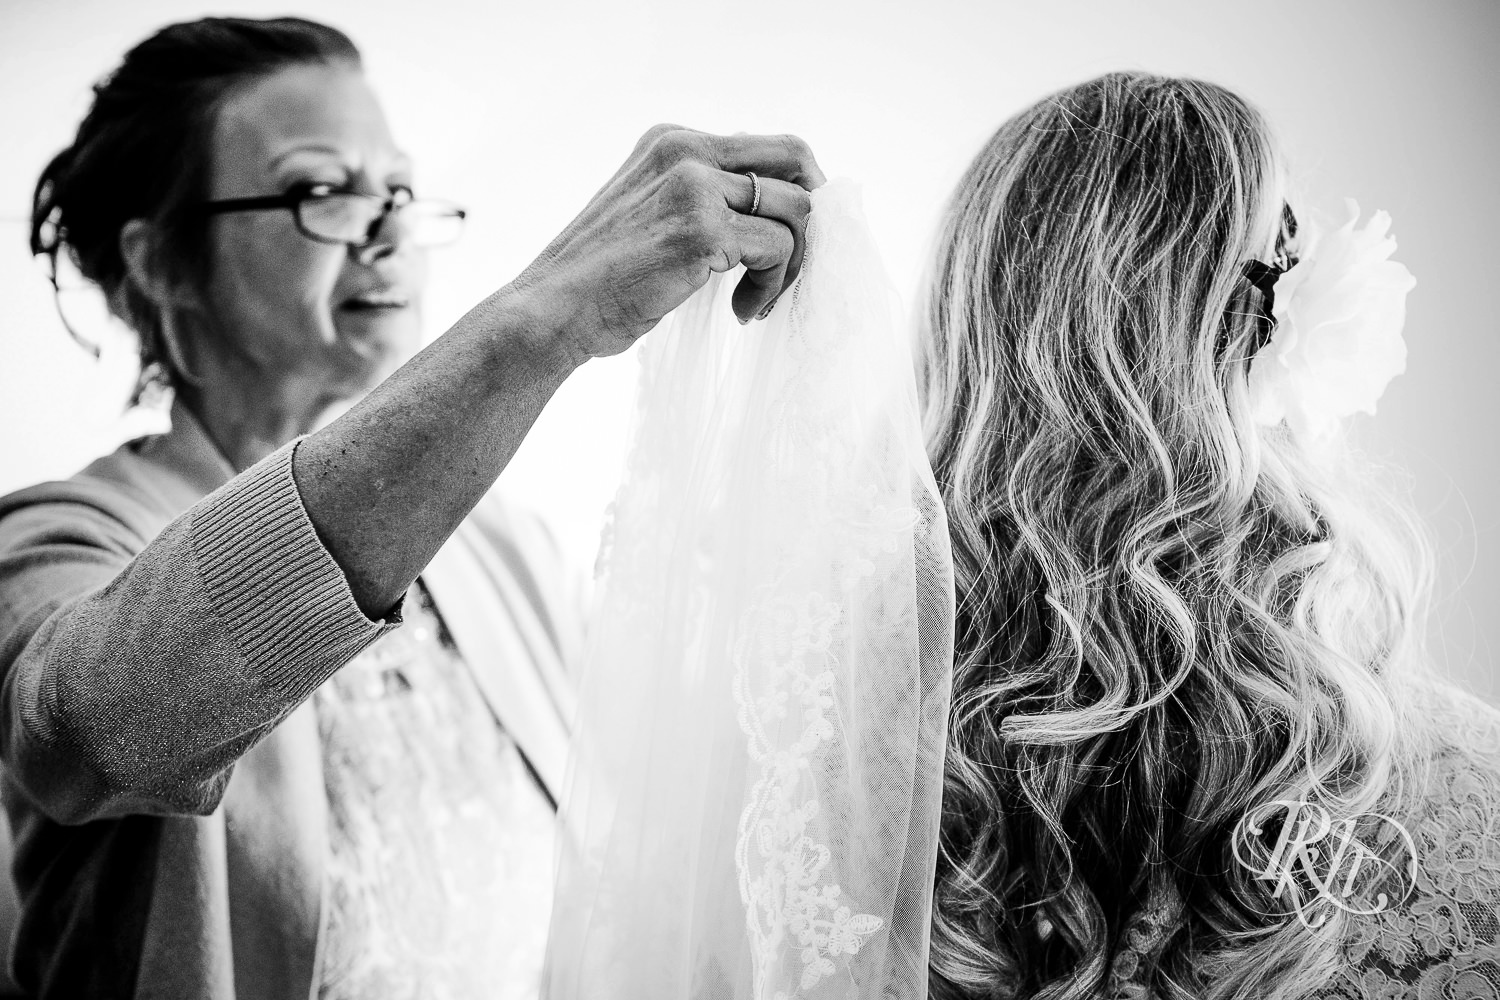 Bride getting buttoned into dress before the wedding at North Metro Event Center in Shoreview, Minnesota.